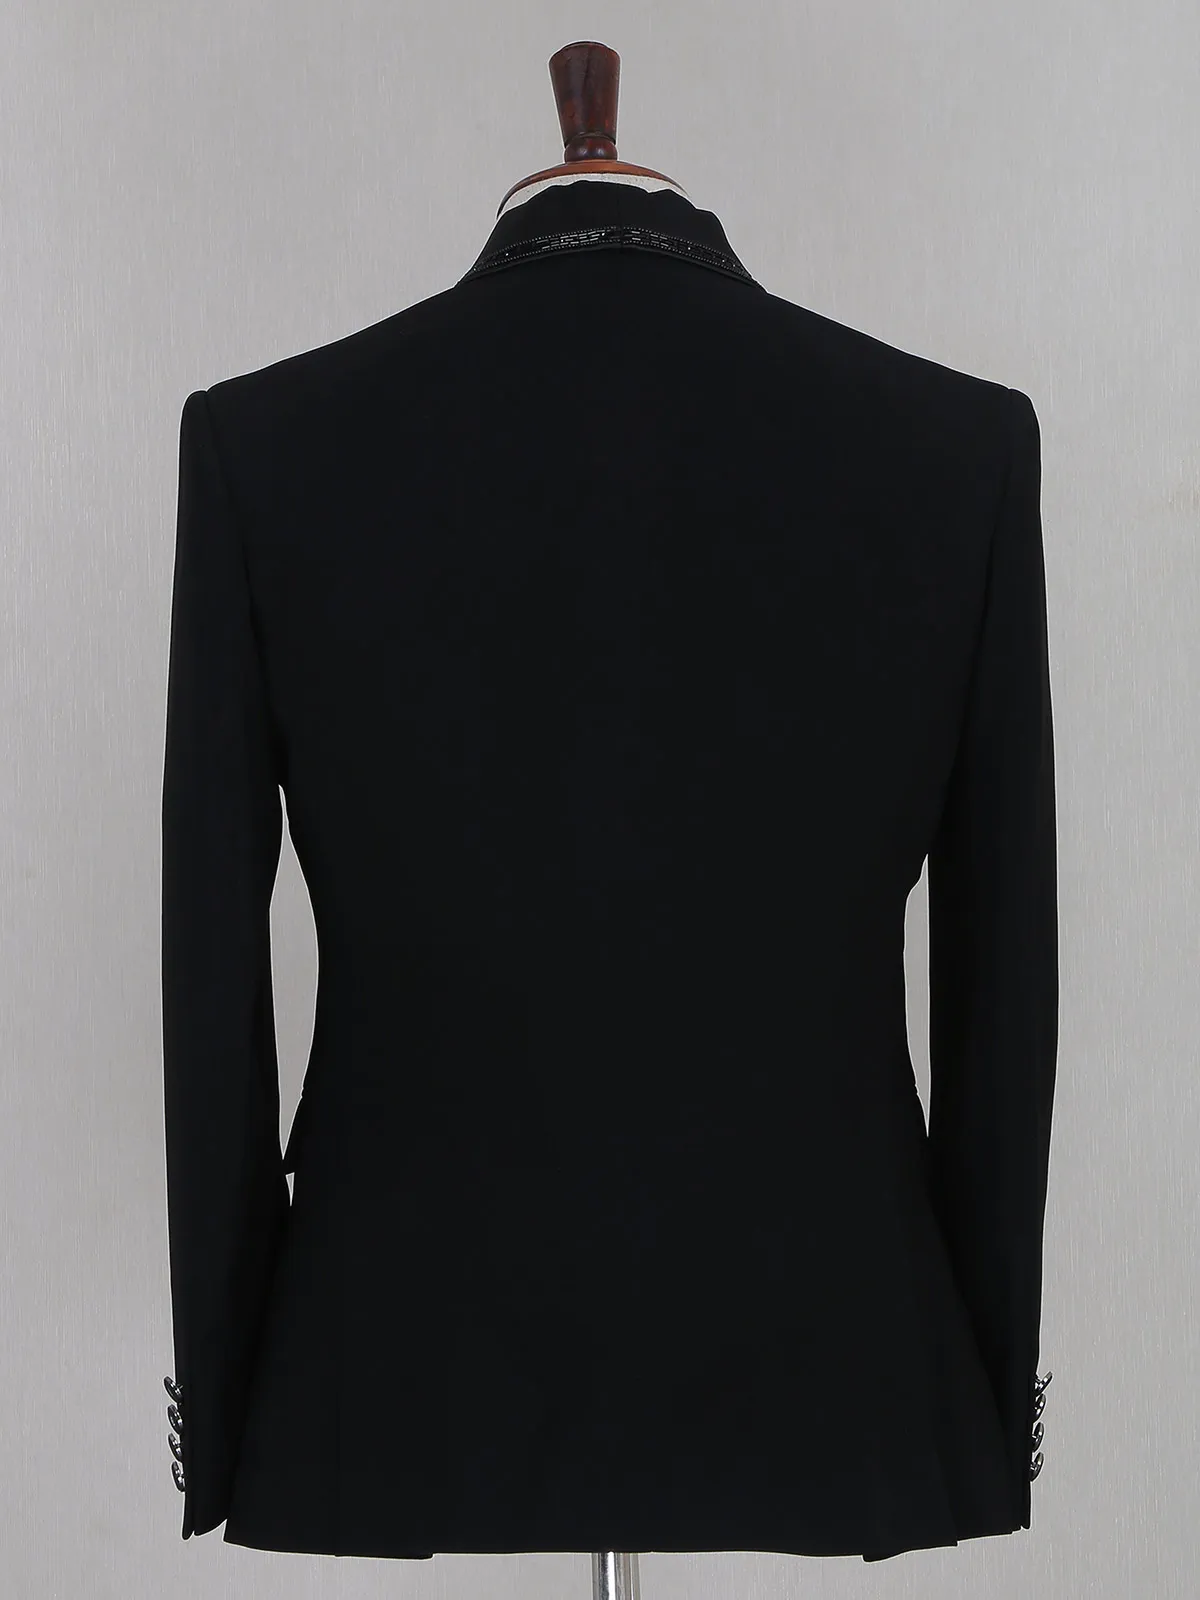 Black terry rayon coat suit for parties